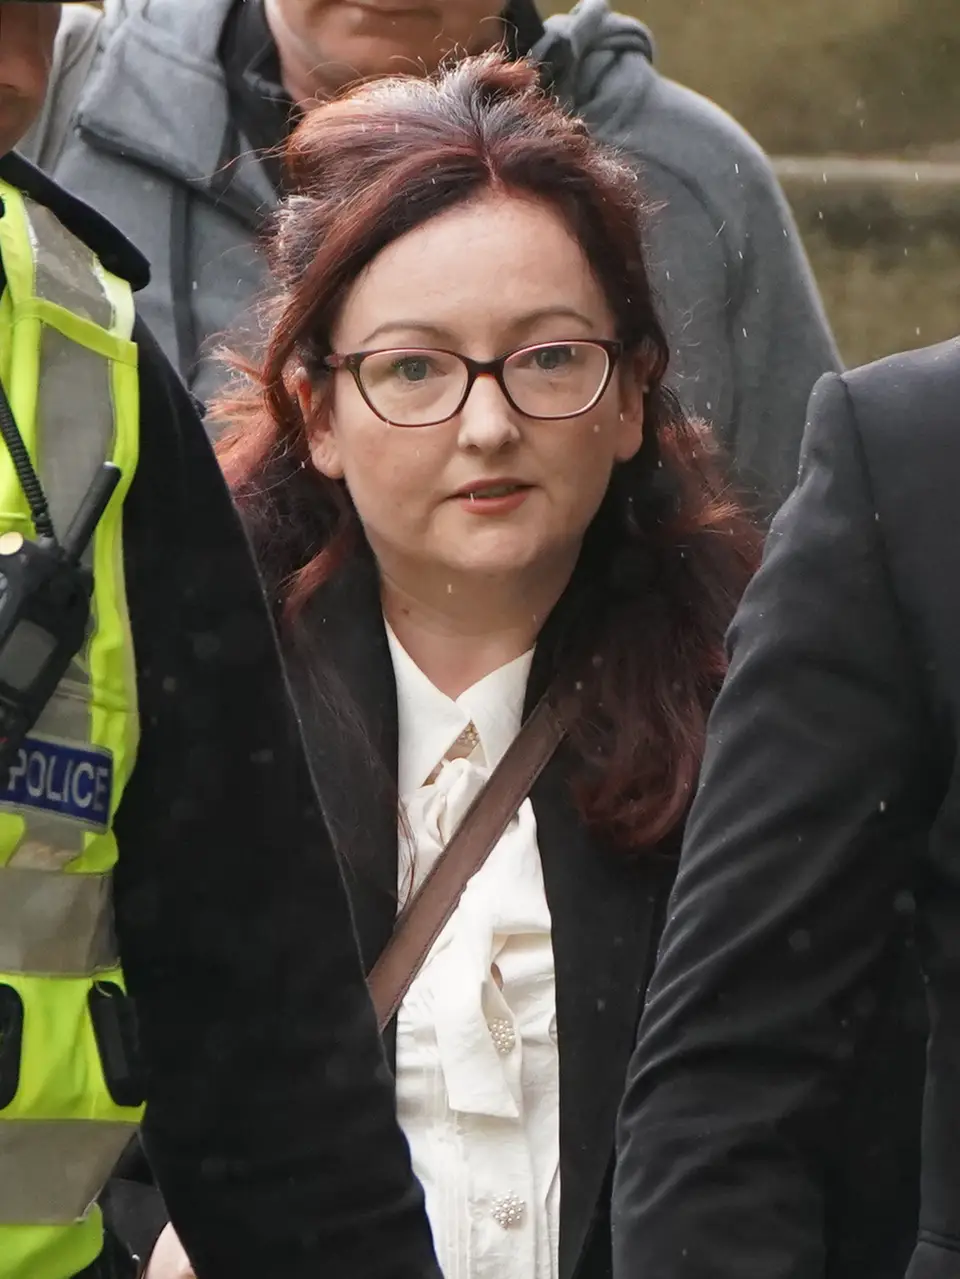 Pc Nicole Short was involved in a confrontation with Sheku Bayoh on the day of his death.